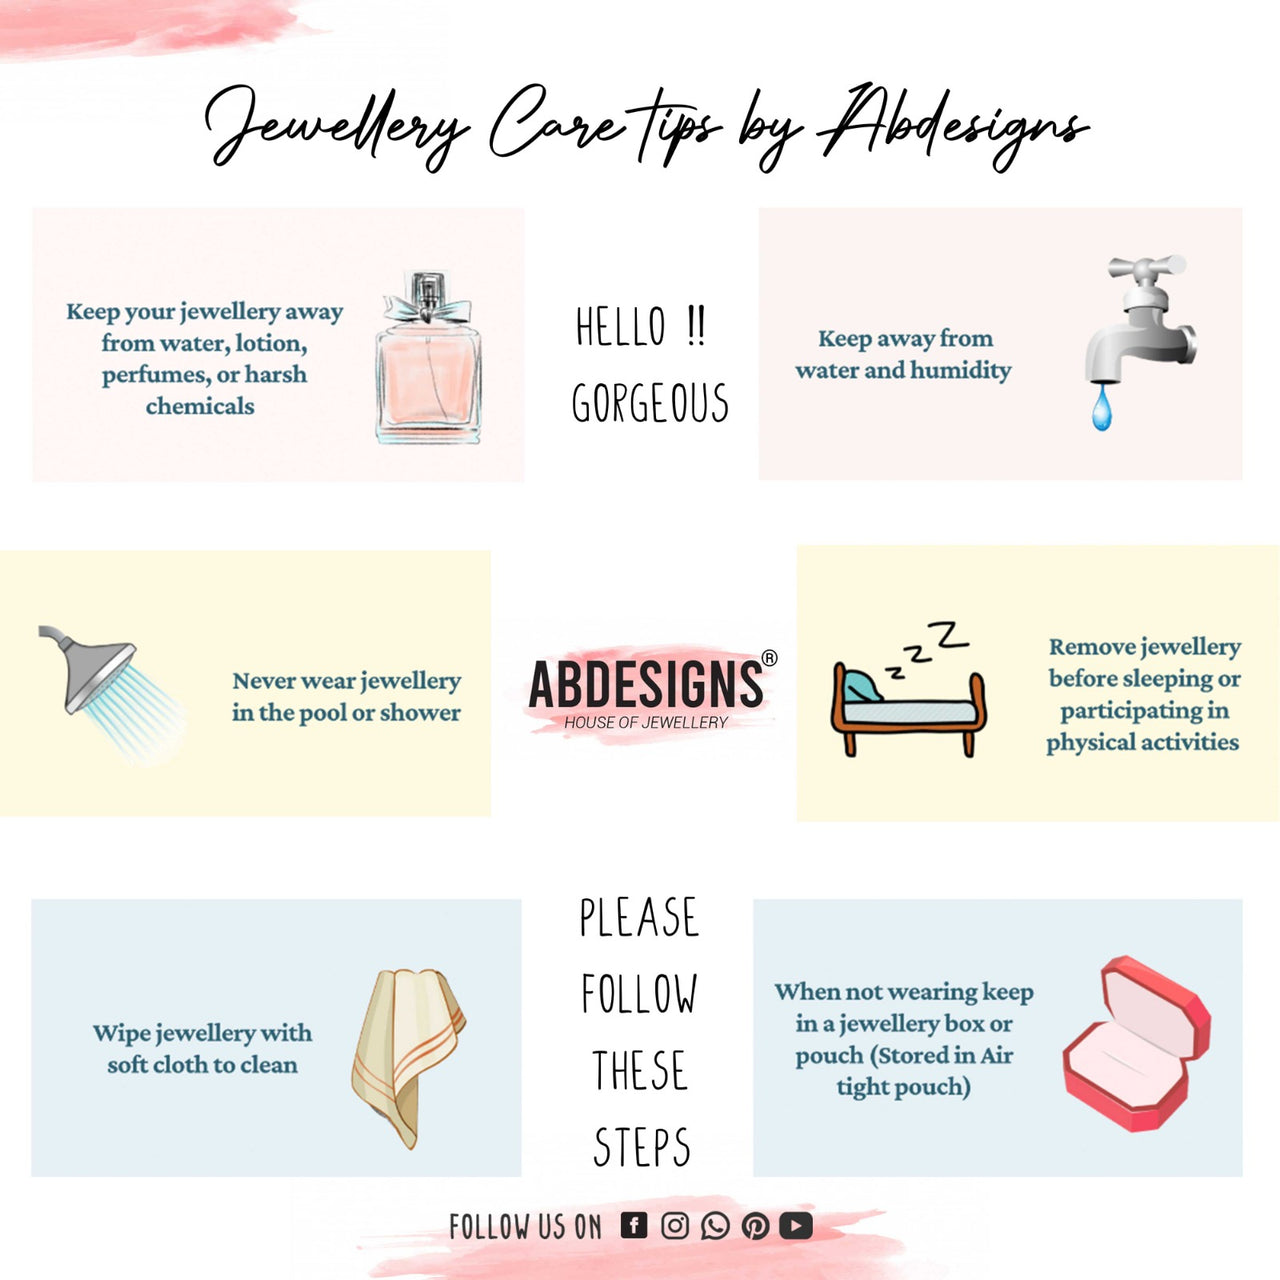 jewellery care tips by abdesigns